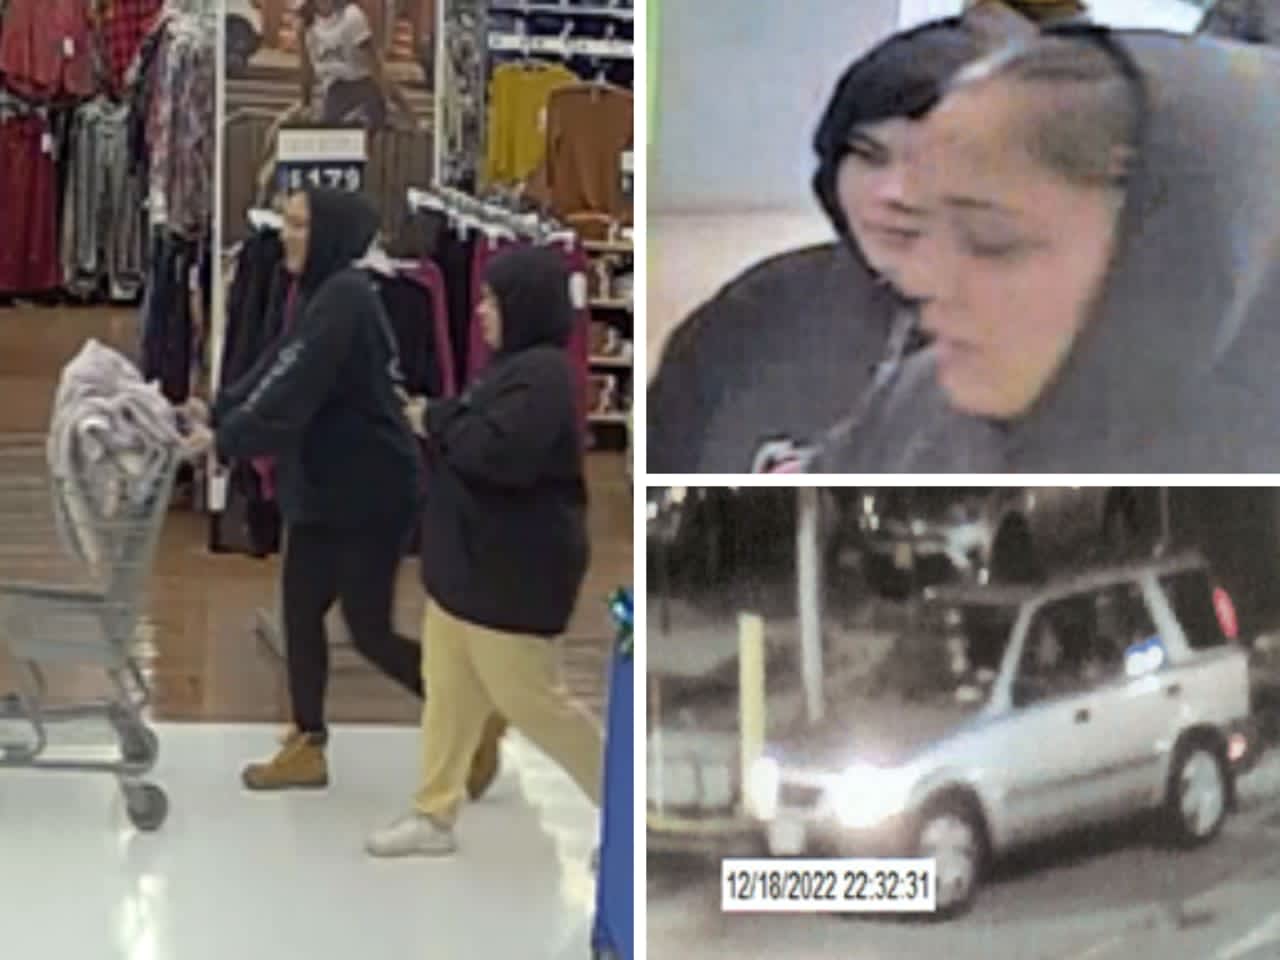 The two suspects alleged to have stolen a wallet at the Walmart in Mohegan Lake were caught on security footage.